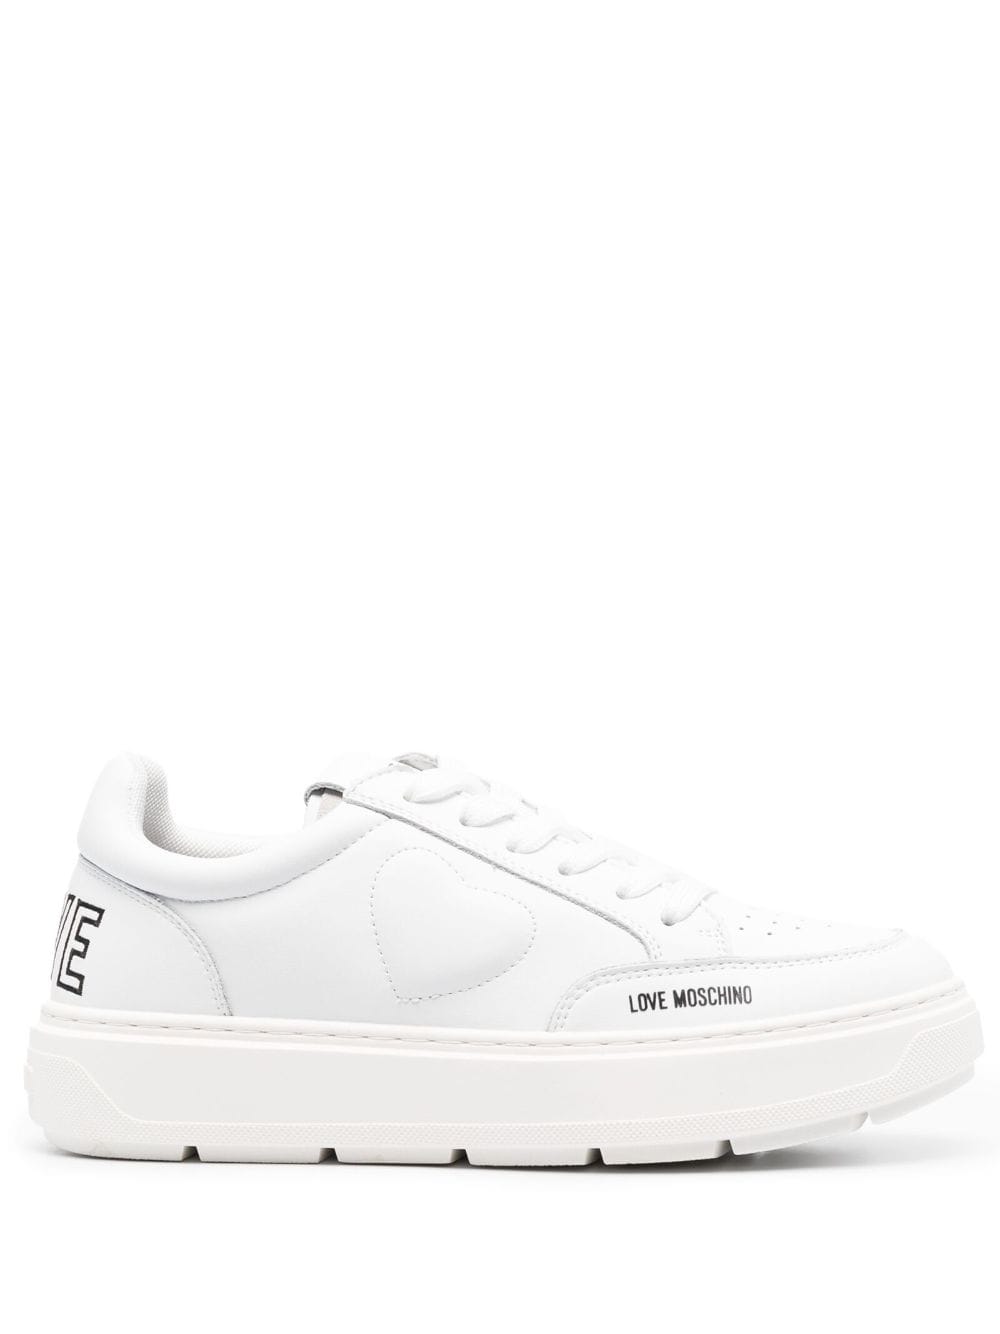 Love Moschino low-top leather sneakers - White von Love Moschino